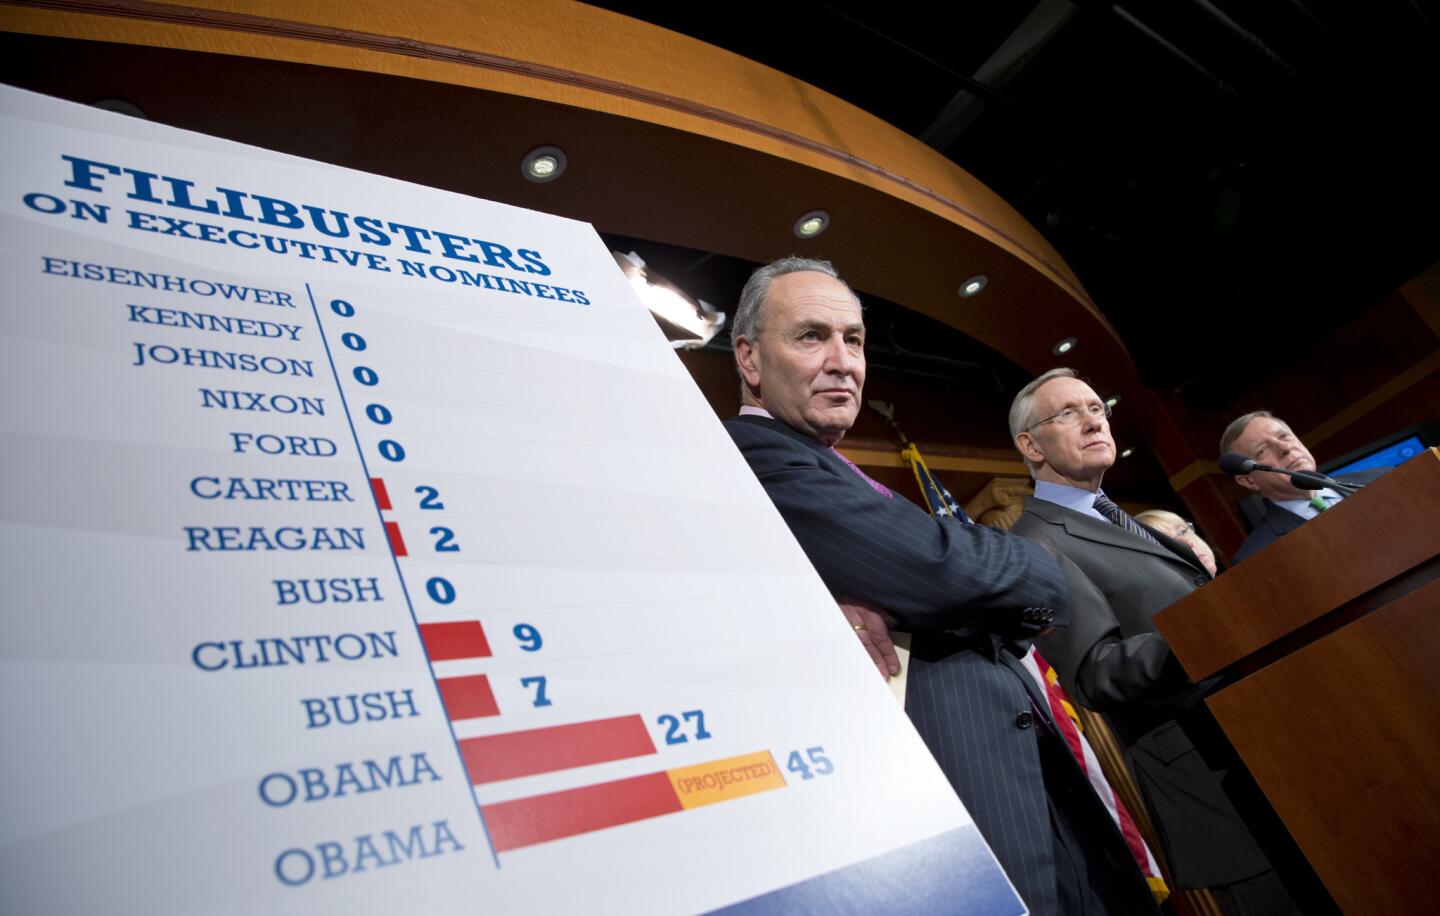 1) Republicans overuse the filibuster